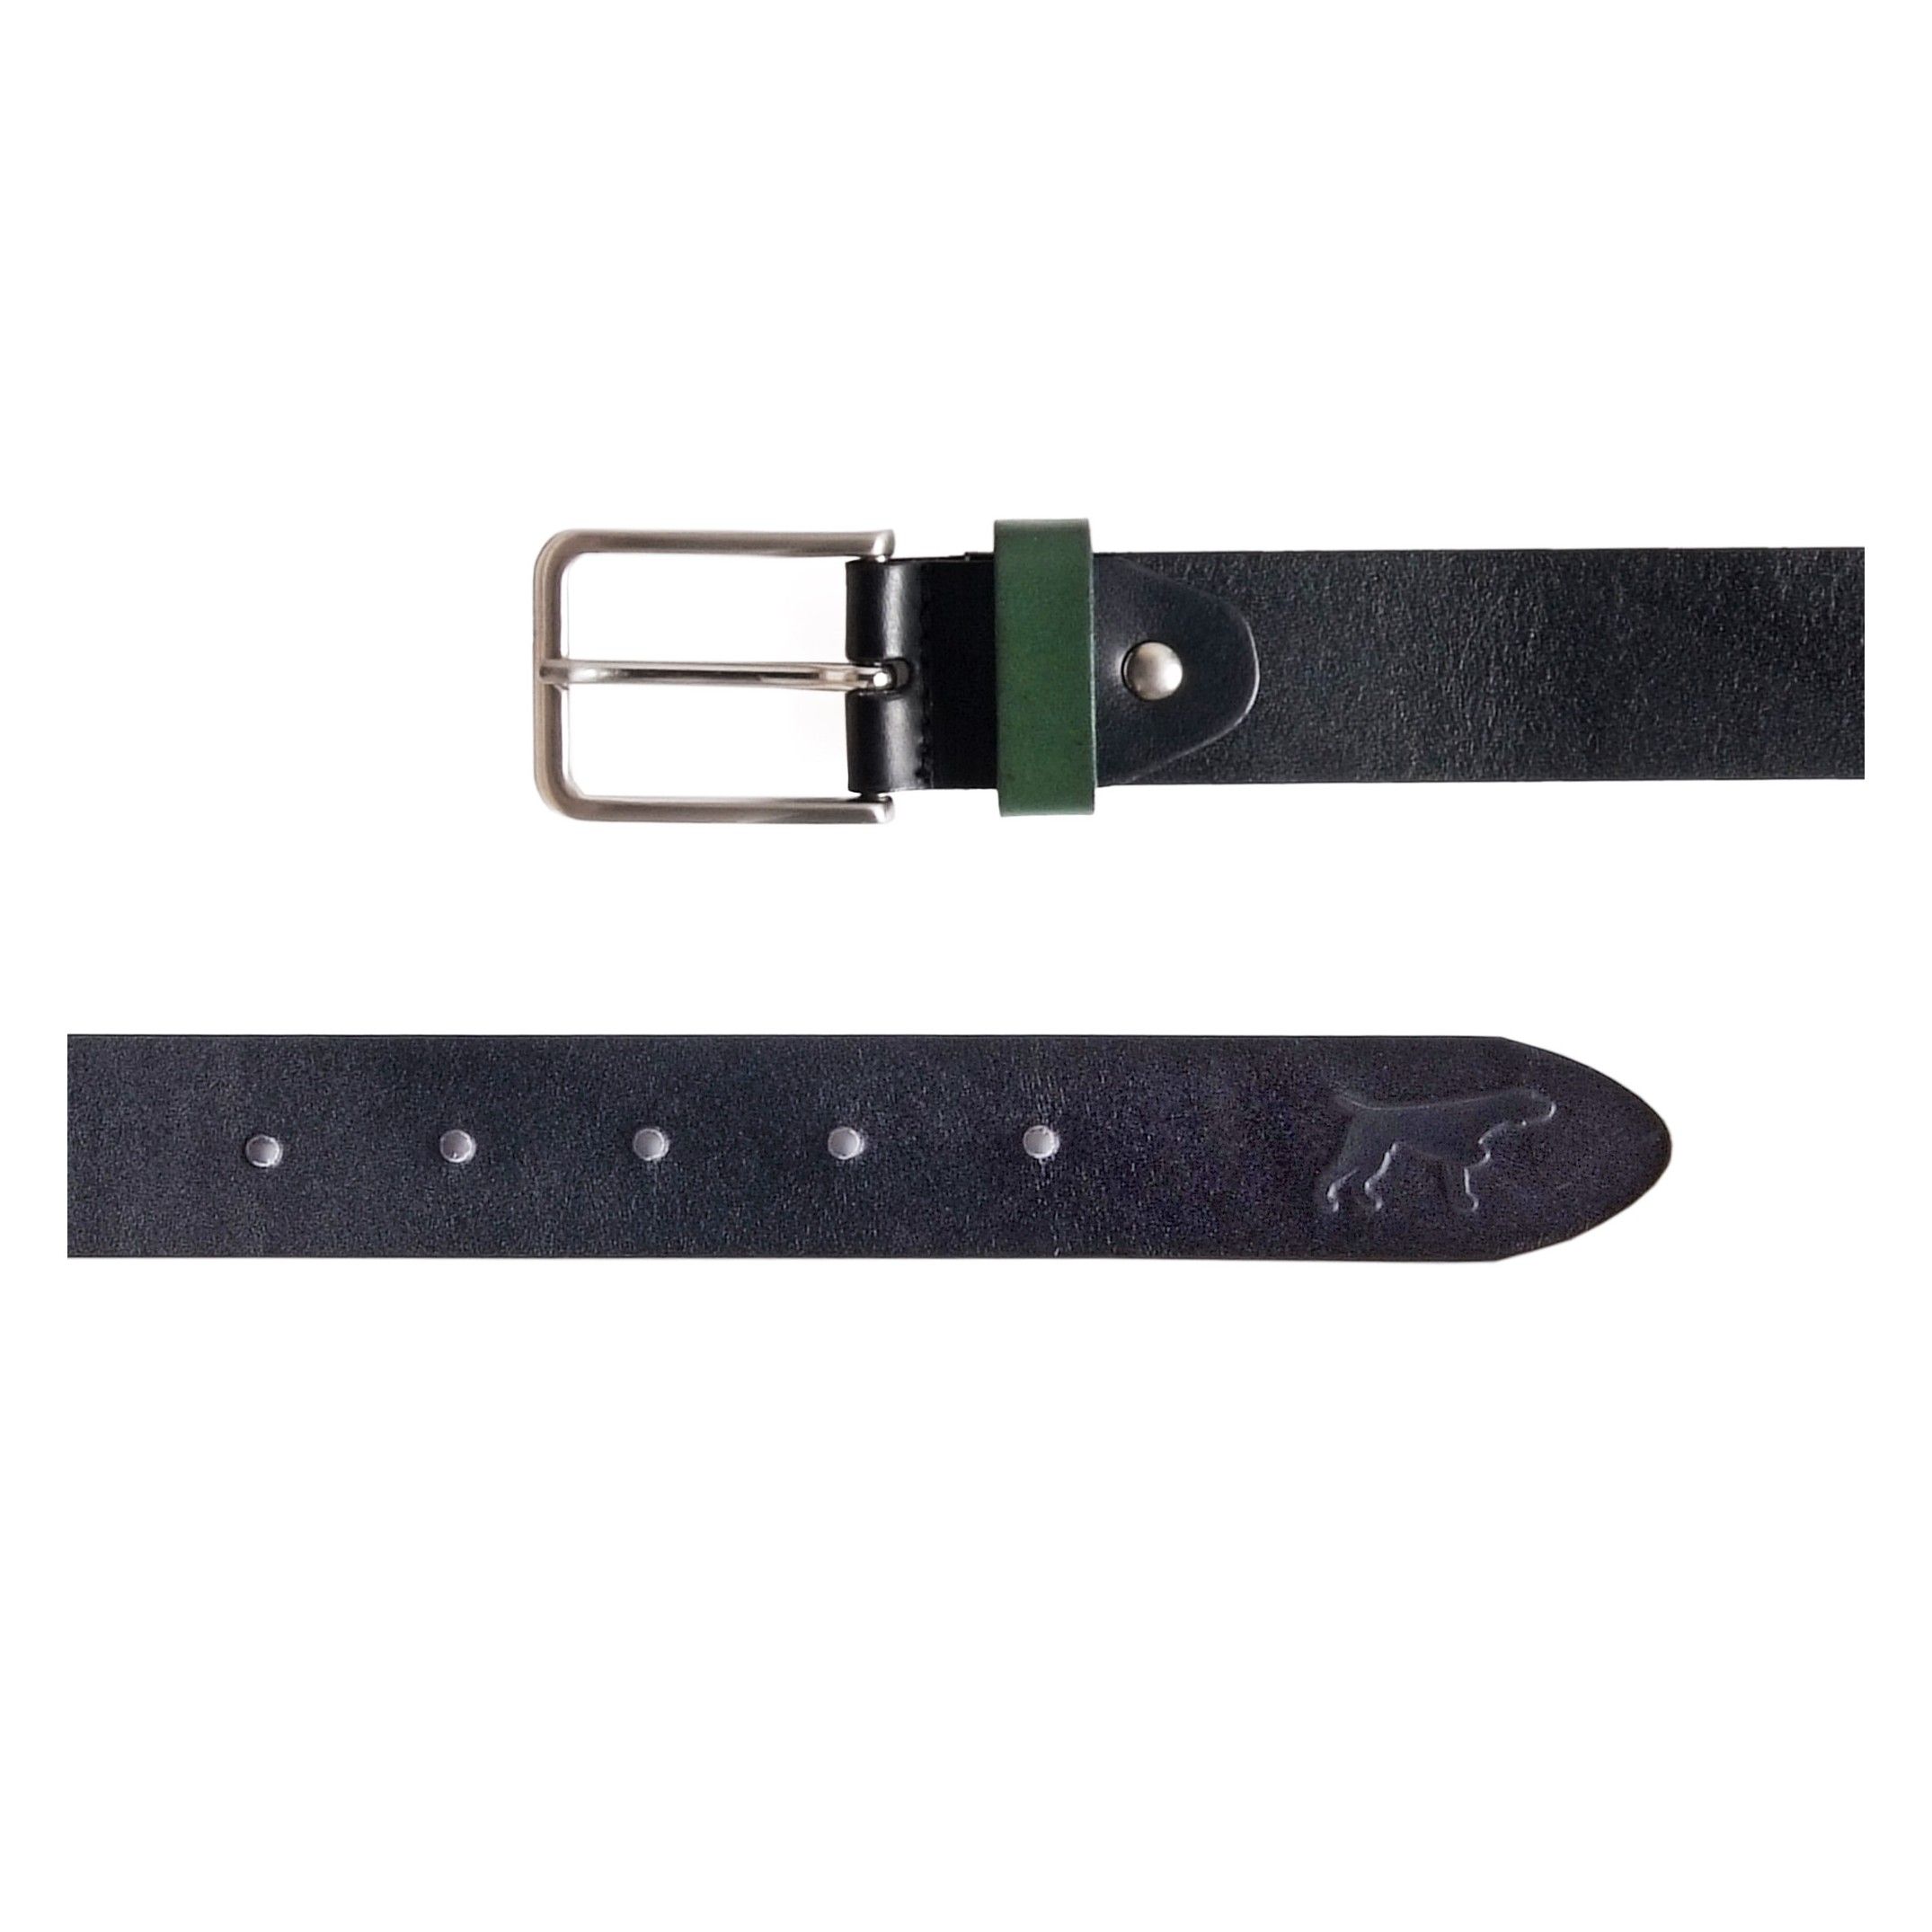 Leather belt bicolor.  Width: 3.5 cm . Made in Spain. By Castellanisimos